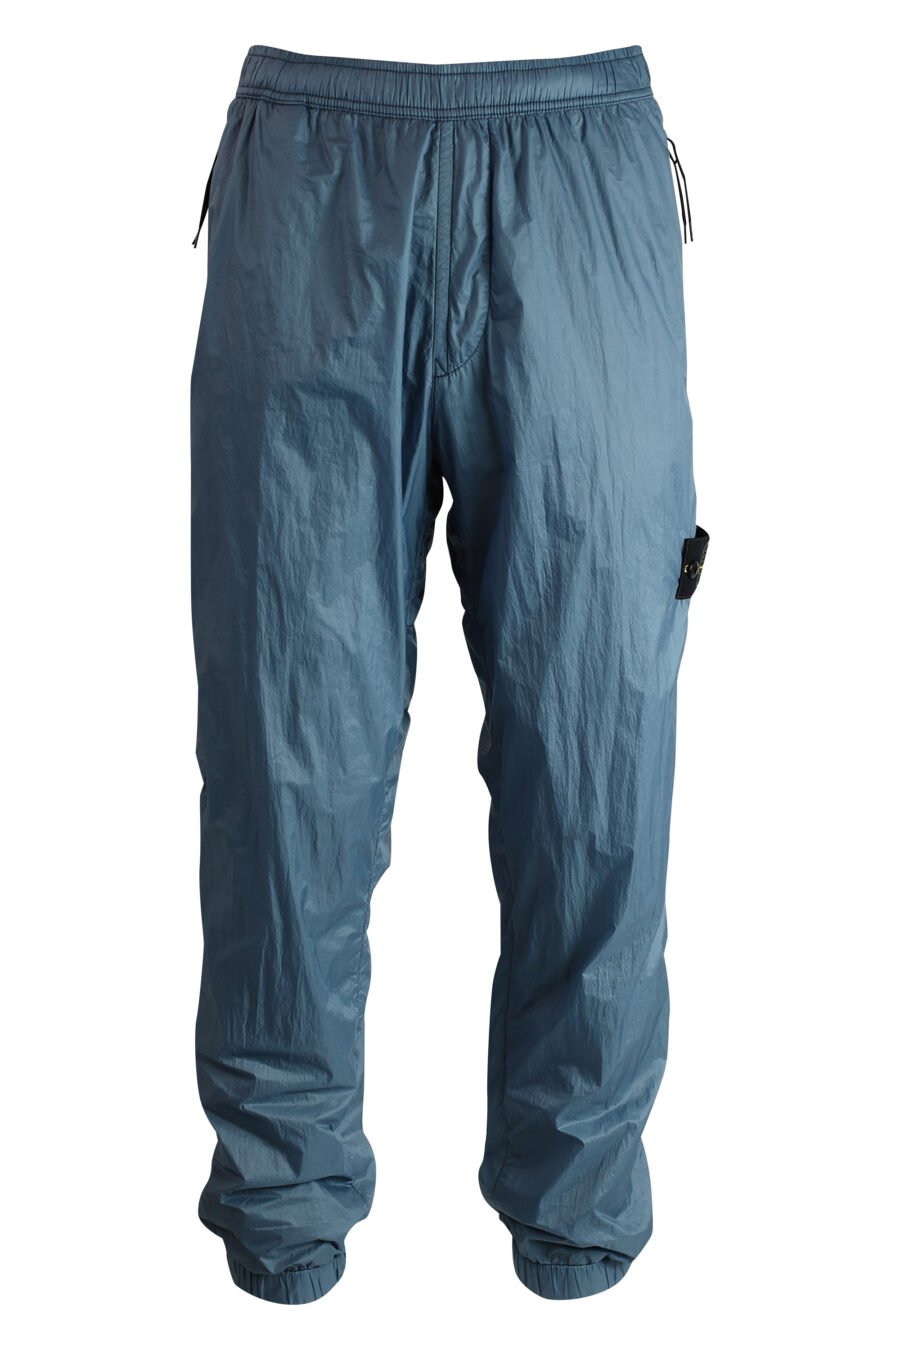 Blue-grey trousers with patch - 8052572559723